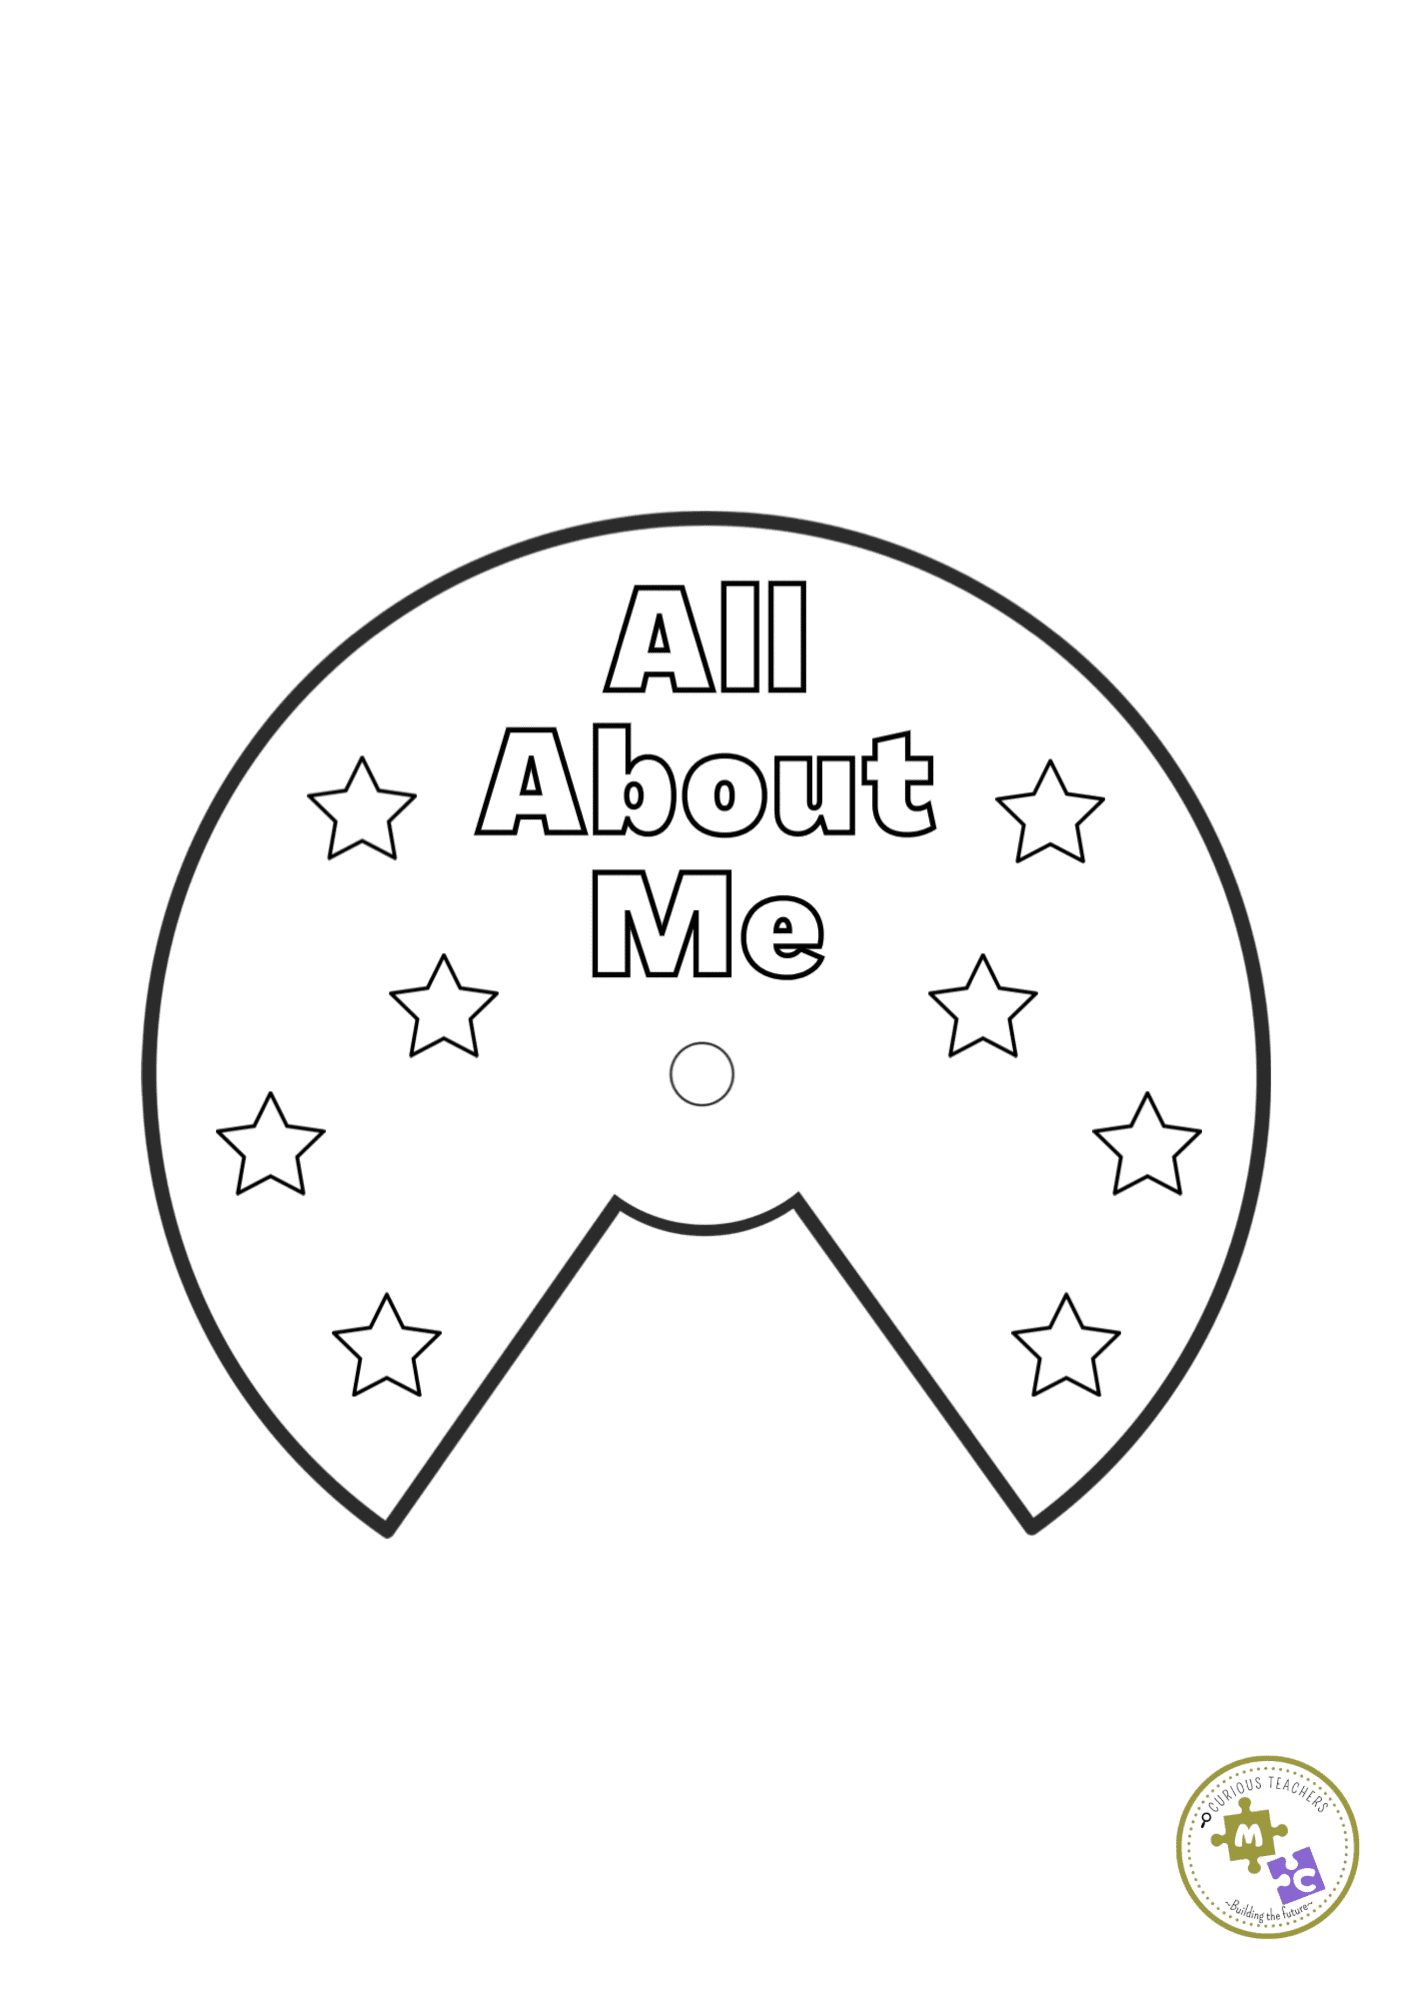 “All about me”